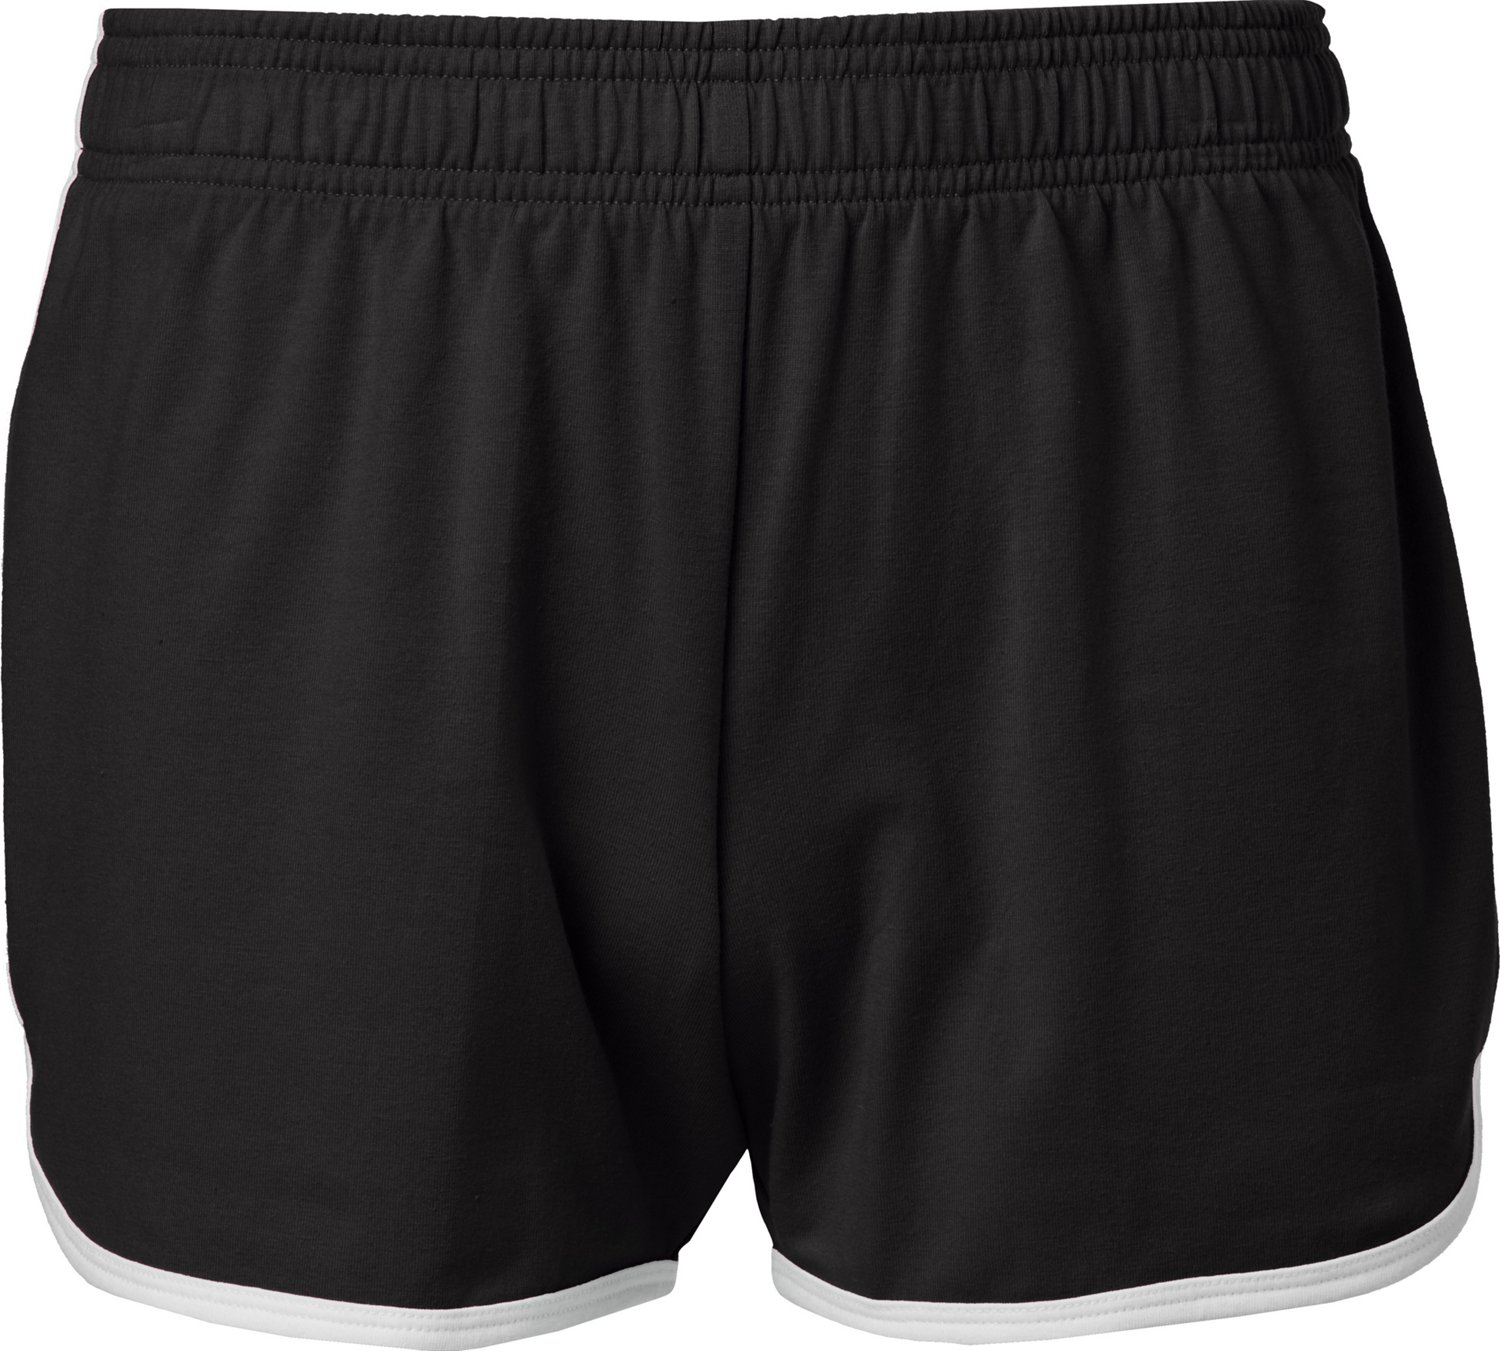 Hind 3-Pack Girls Athletic Shorts, Bike Shorts, Workout Clothes